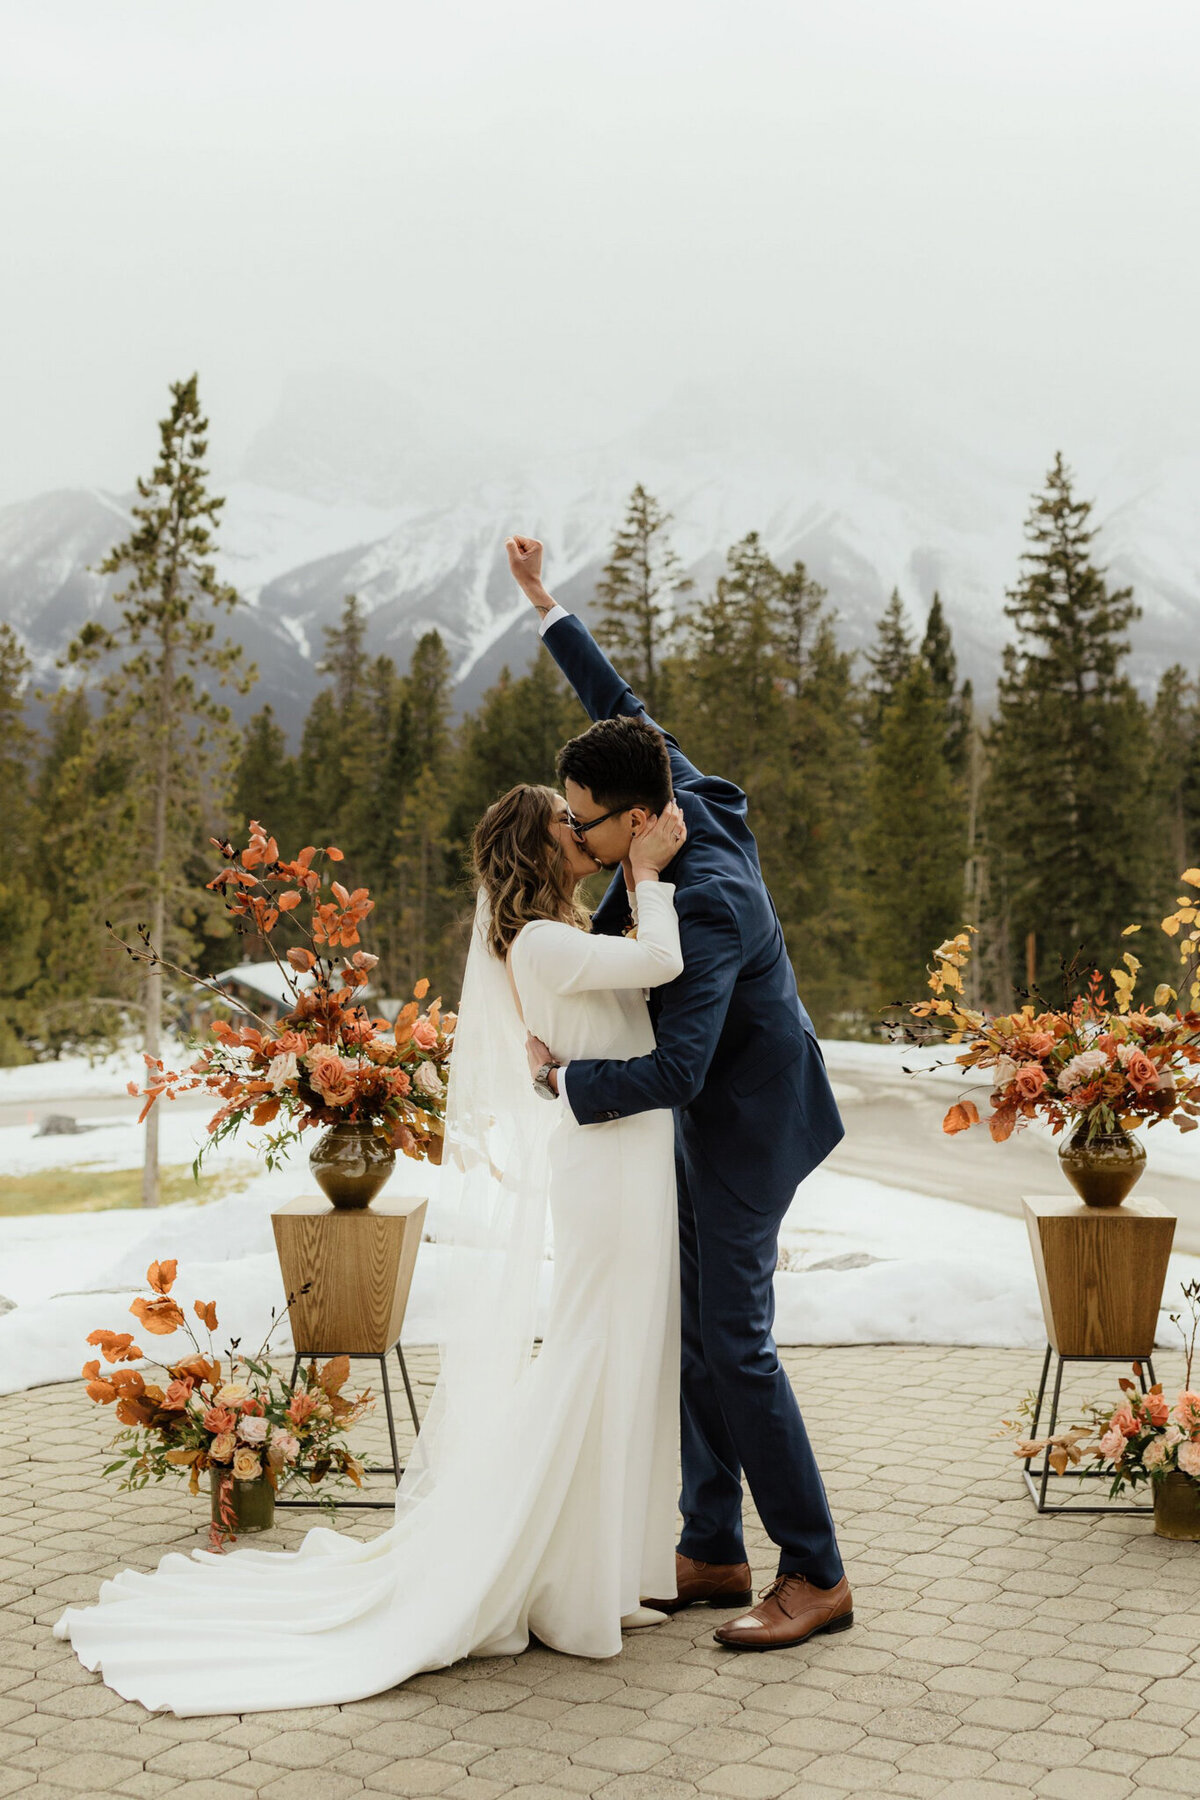 Couple kissing at wedding ceremony, stunning pink and tangerine florals, by Malorie Reiter Photography, adventurous and authentic wedding photographer in Lethbridge, Alberta. Featured on the Bronte Bride Vendor Guide.